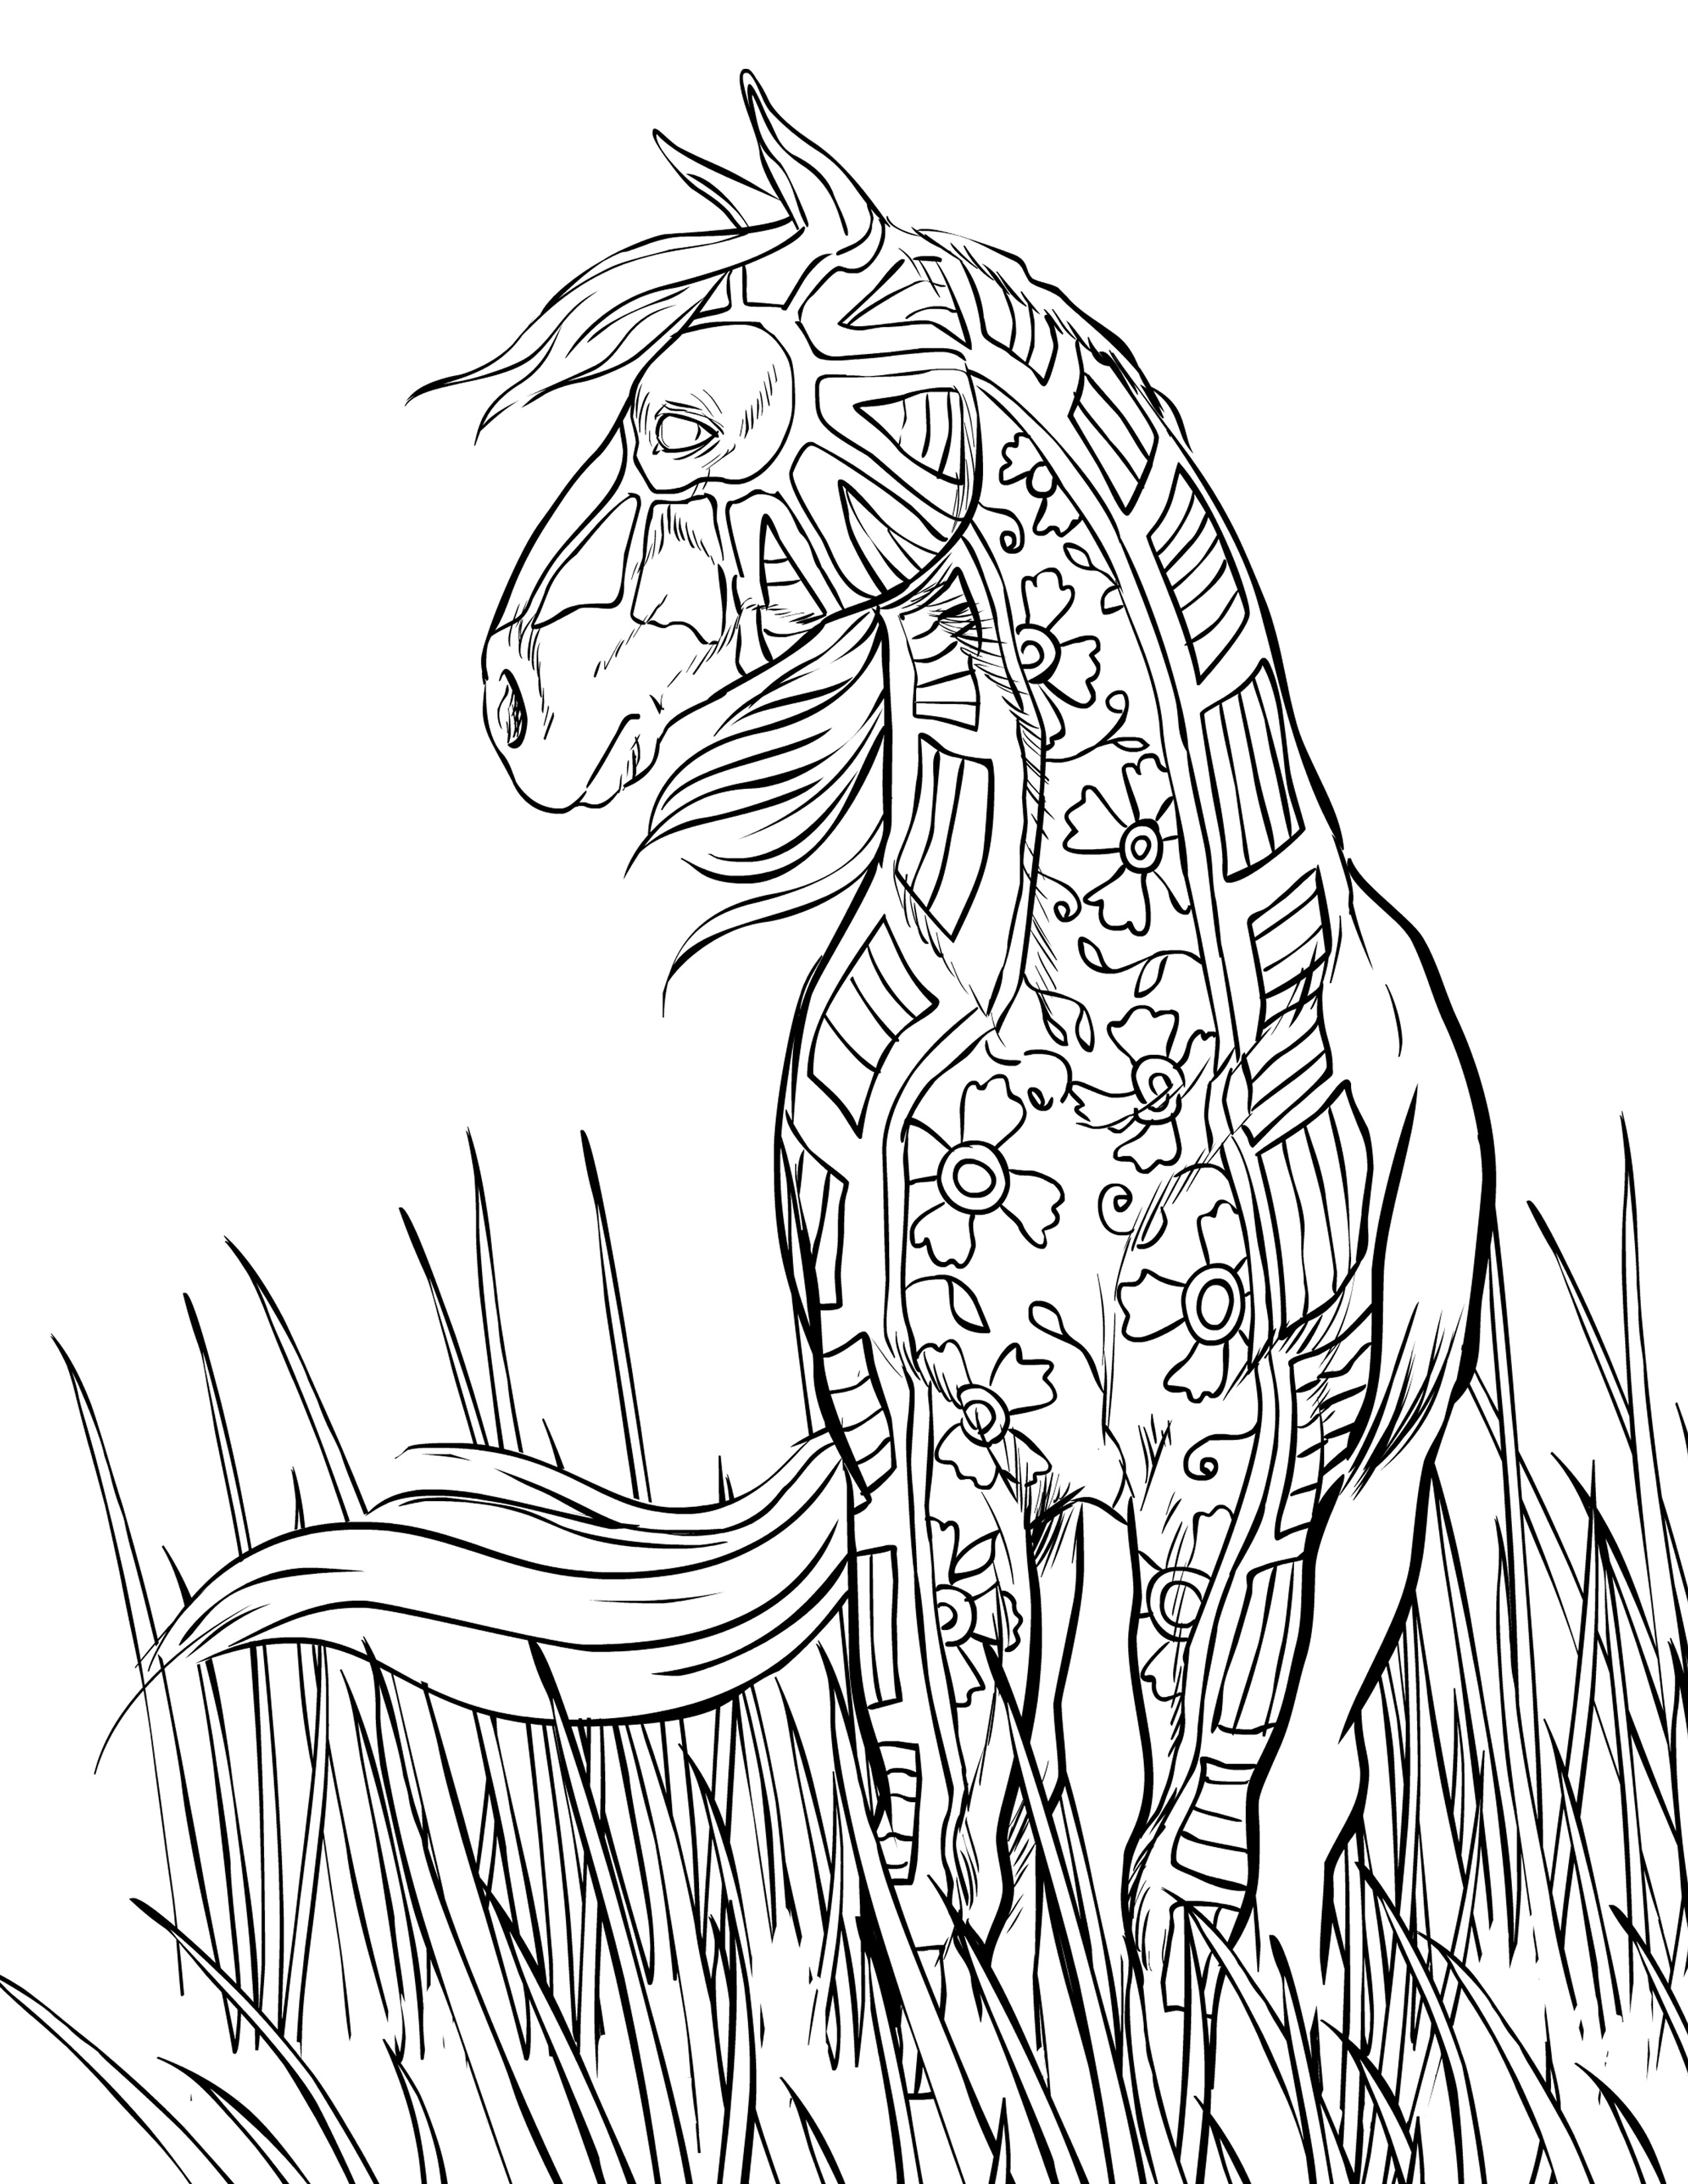 Coloring Pages For Adults Horses
 FREE HORSE COLORING PAGES